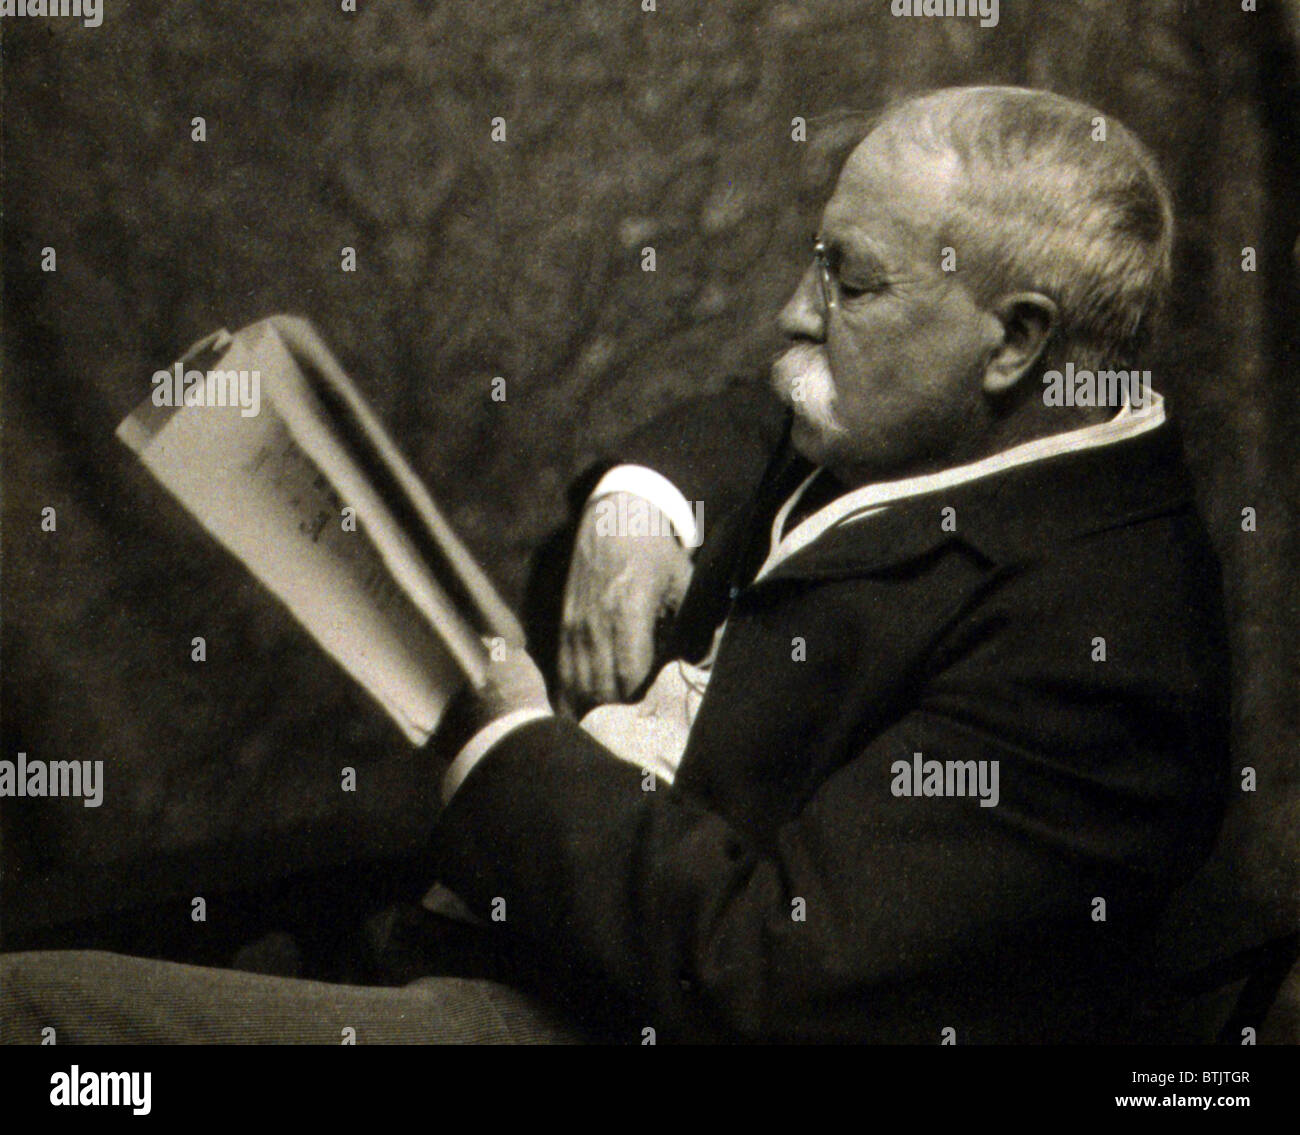 William Dean Howells (1837-1920), American novelist who championed realist and naturalist writers. Photograph by Zaida Ben Yusuf, ca. 1900. Stock Photo